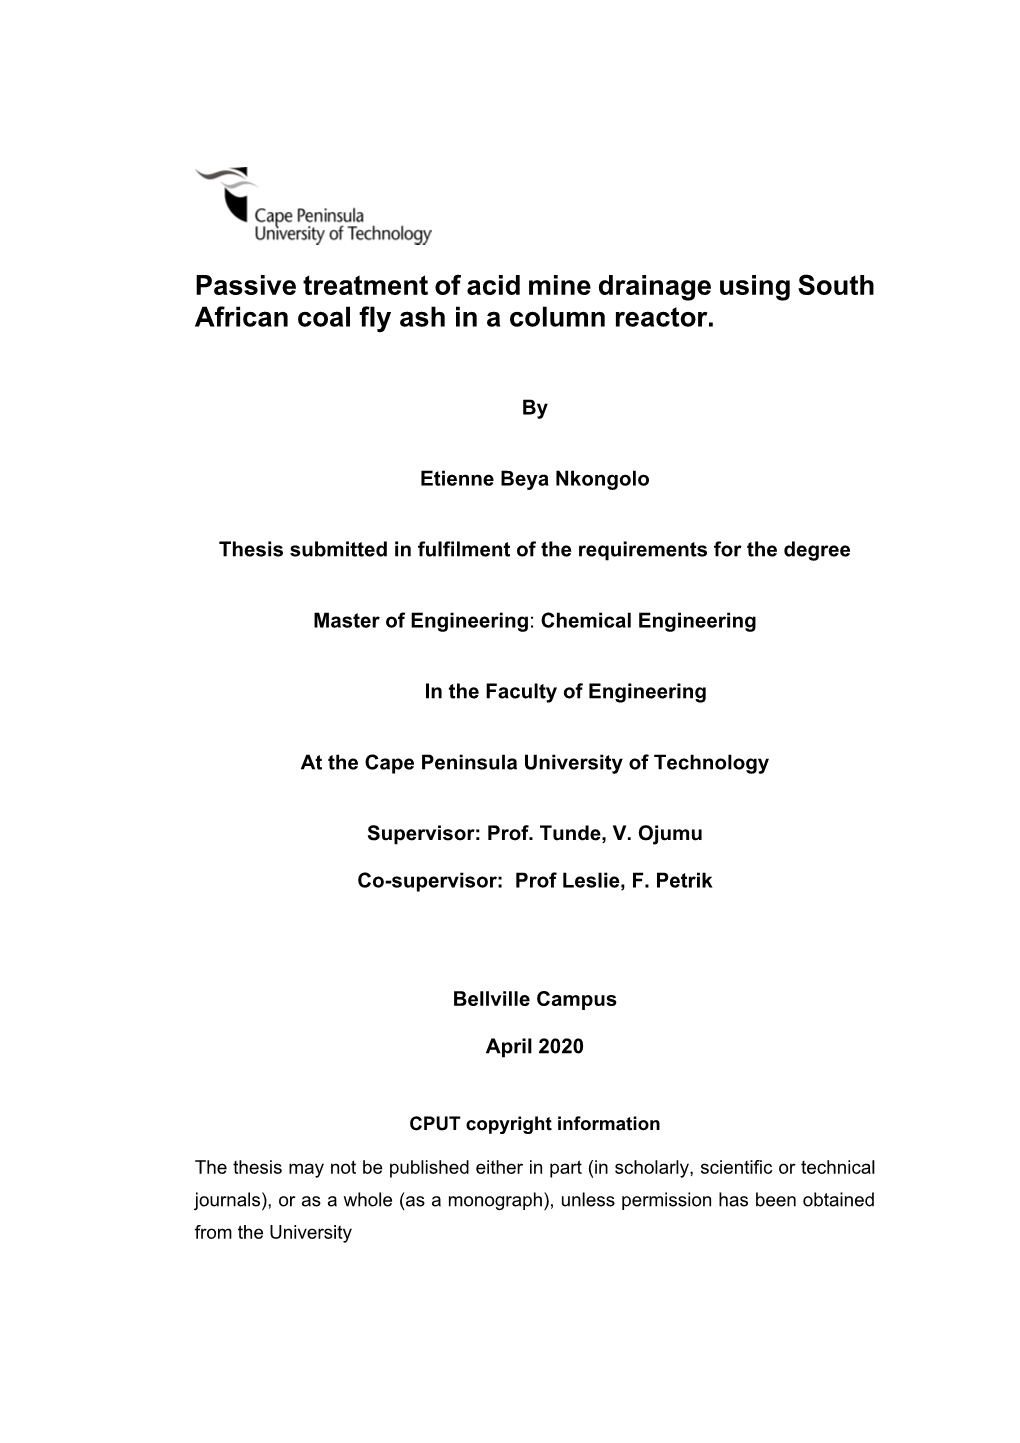 Passive Treatment of Acid Mine Drainage Using South African Coal Fly Ash in a Column Reactor